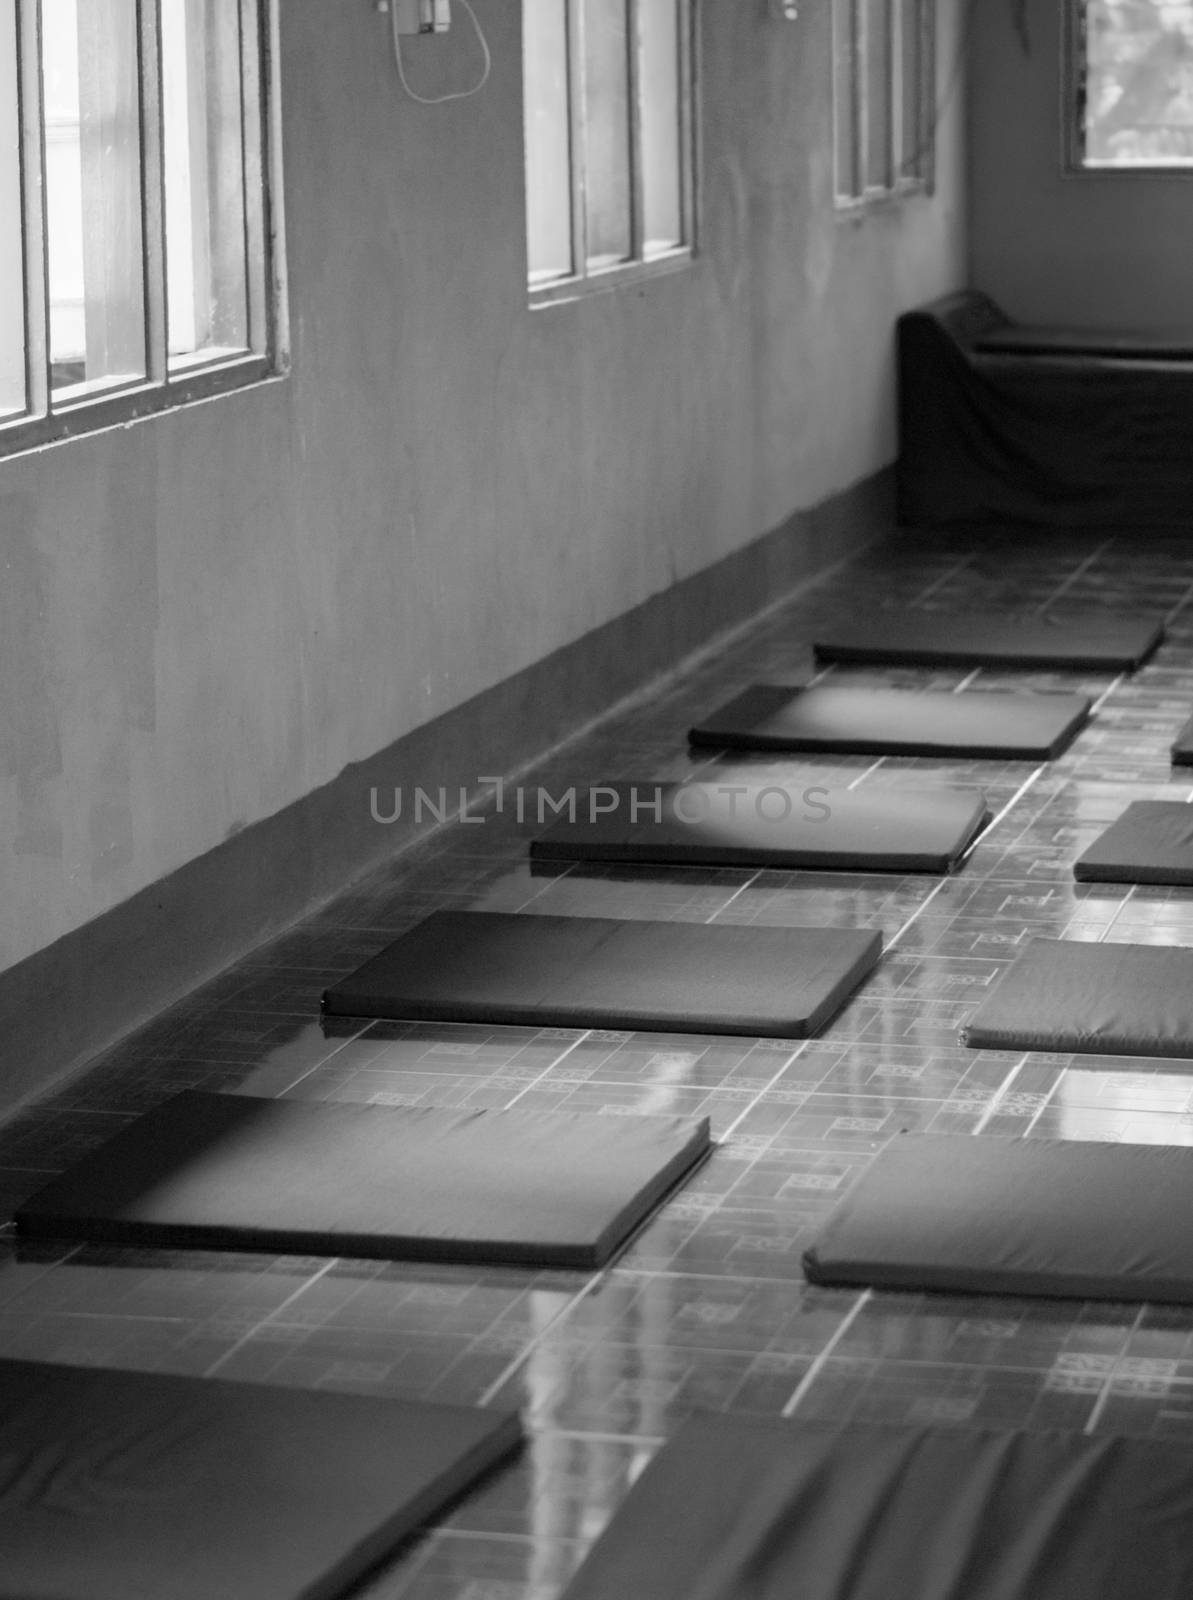 BLACK AND WHITE PHOTO OF ARRANGED MEDITATION CUSHIONS IN MEDITATION CENTER